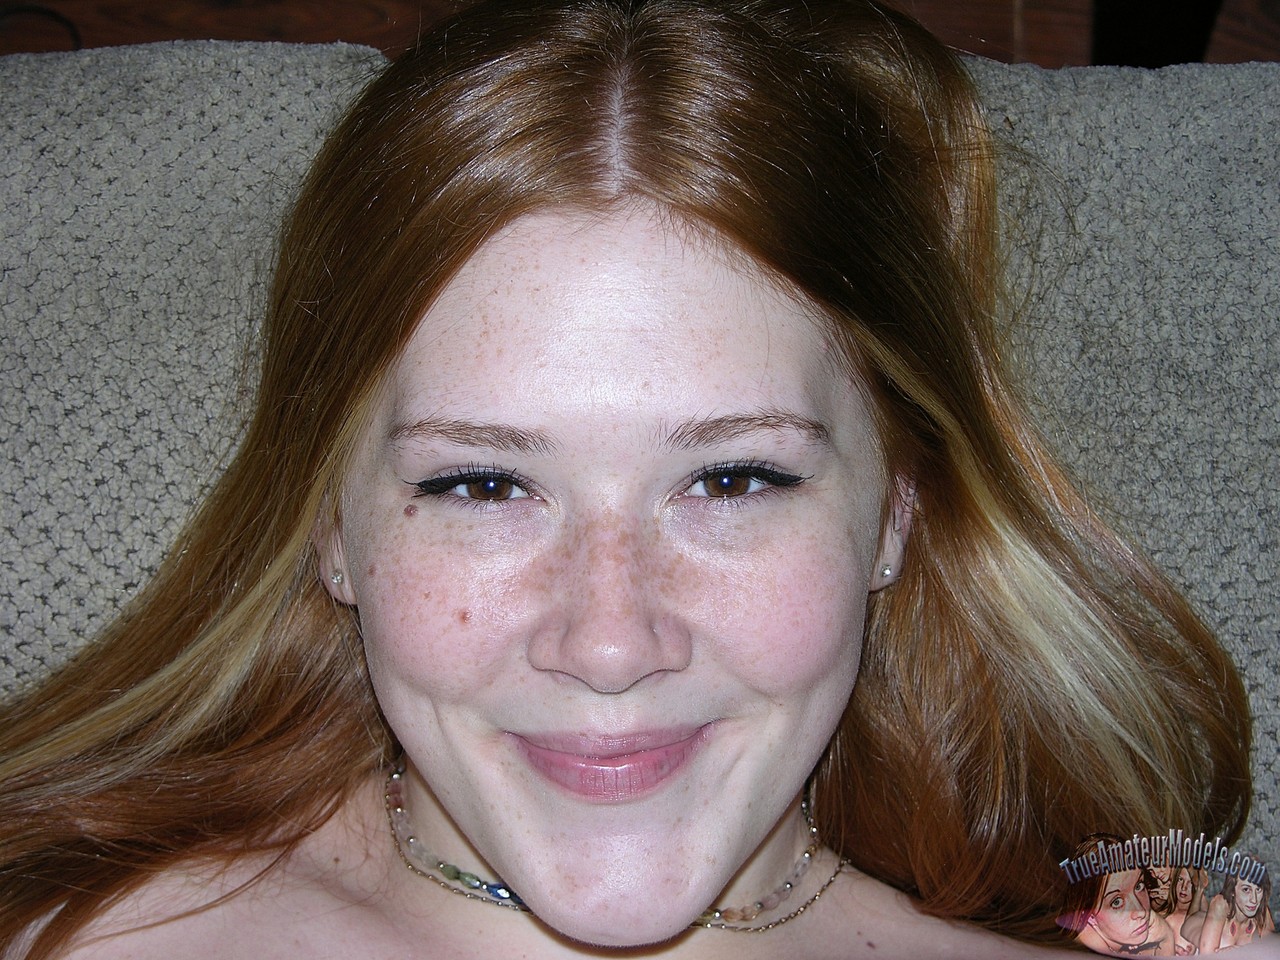 Freckled Face Redhead Amateur Teen Pulling Down Shorts To Expose Butthole foto porno #422855440